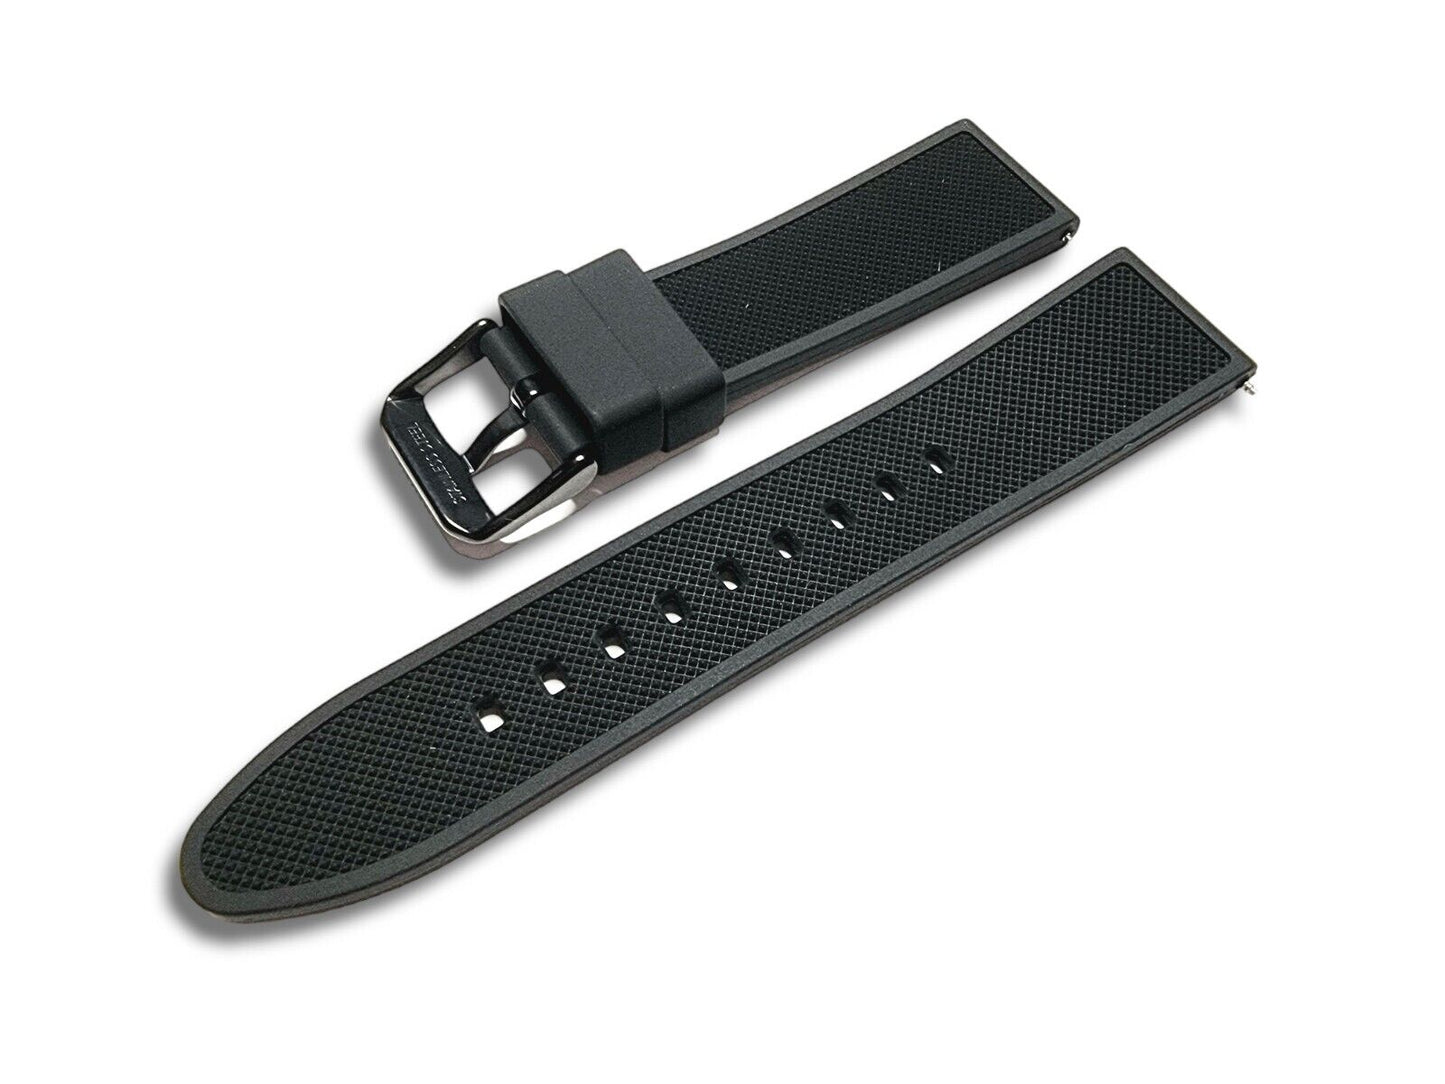 Premium Silicone Rubber Textured Watch Strap Band Soft 18mm 20mm 22mm 24mm Black